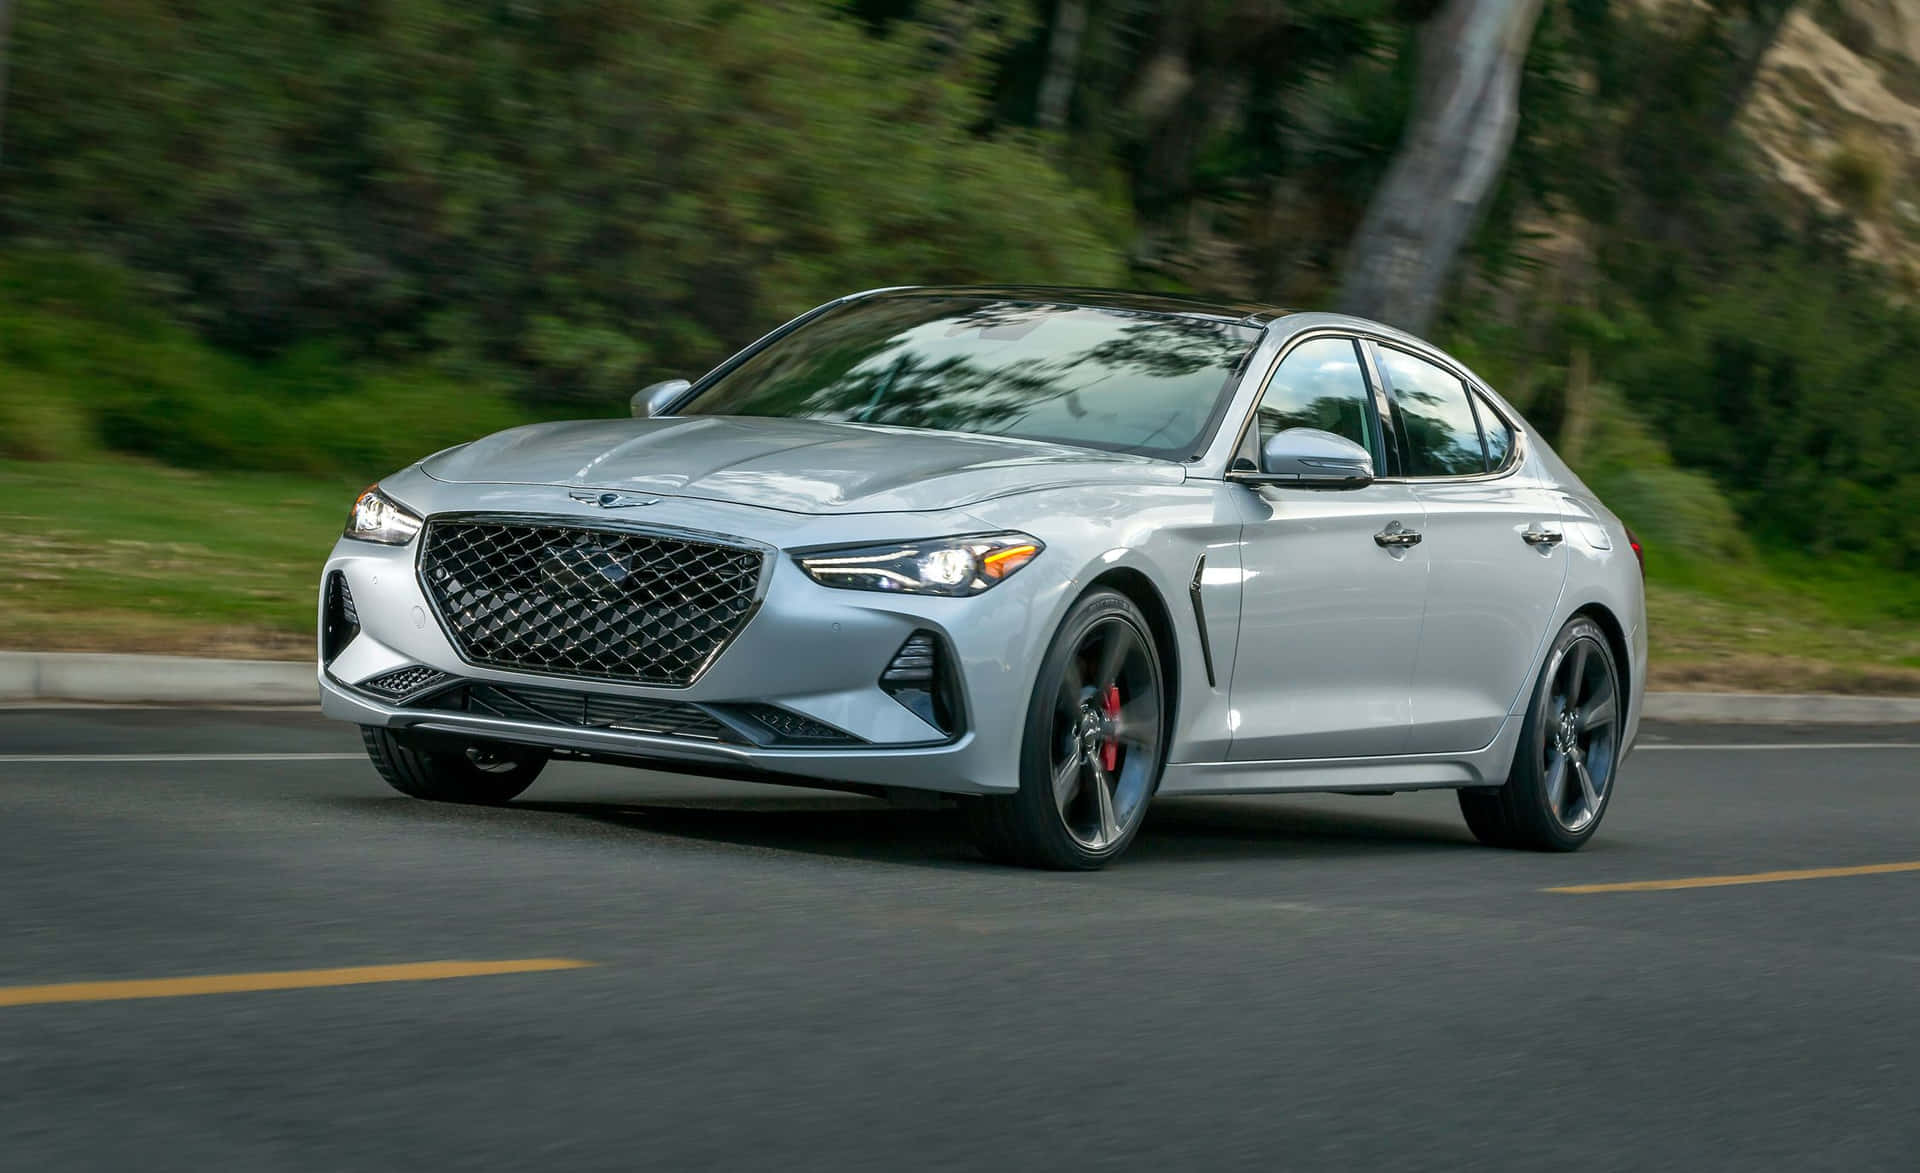 The 2019 Genesis Gt Is Driving Down The Road